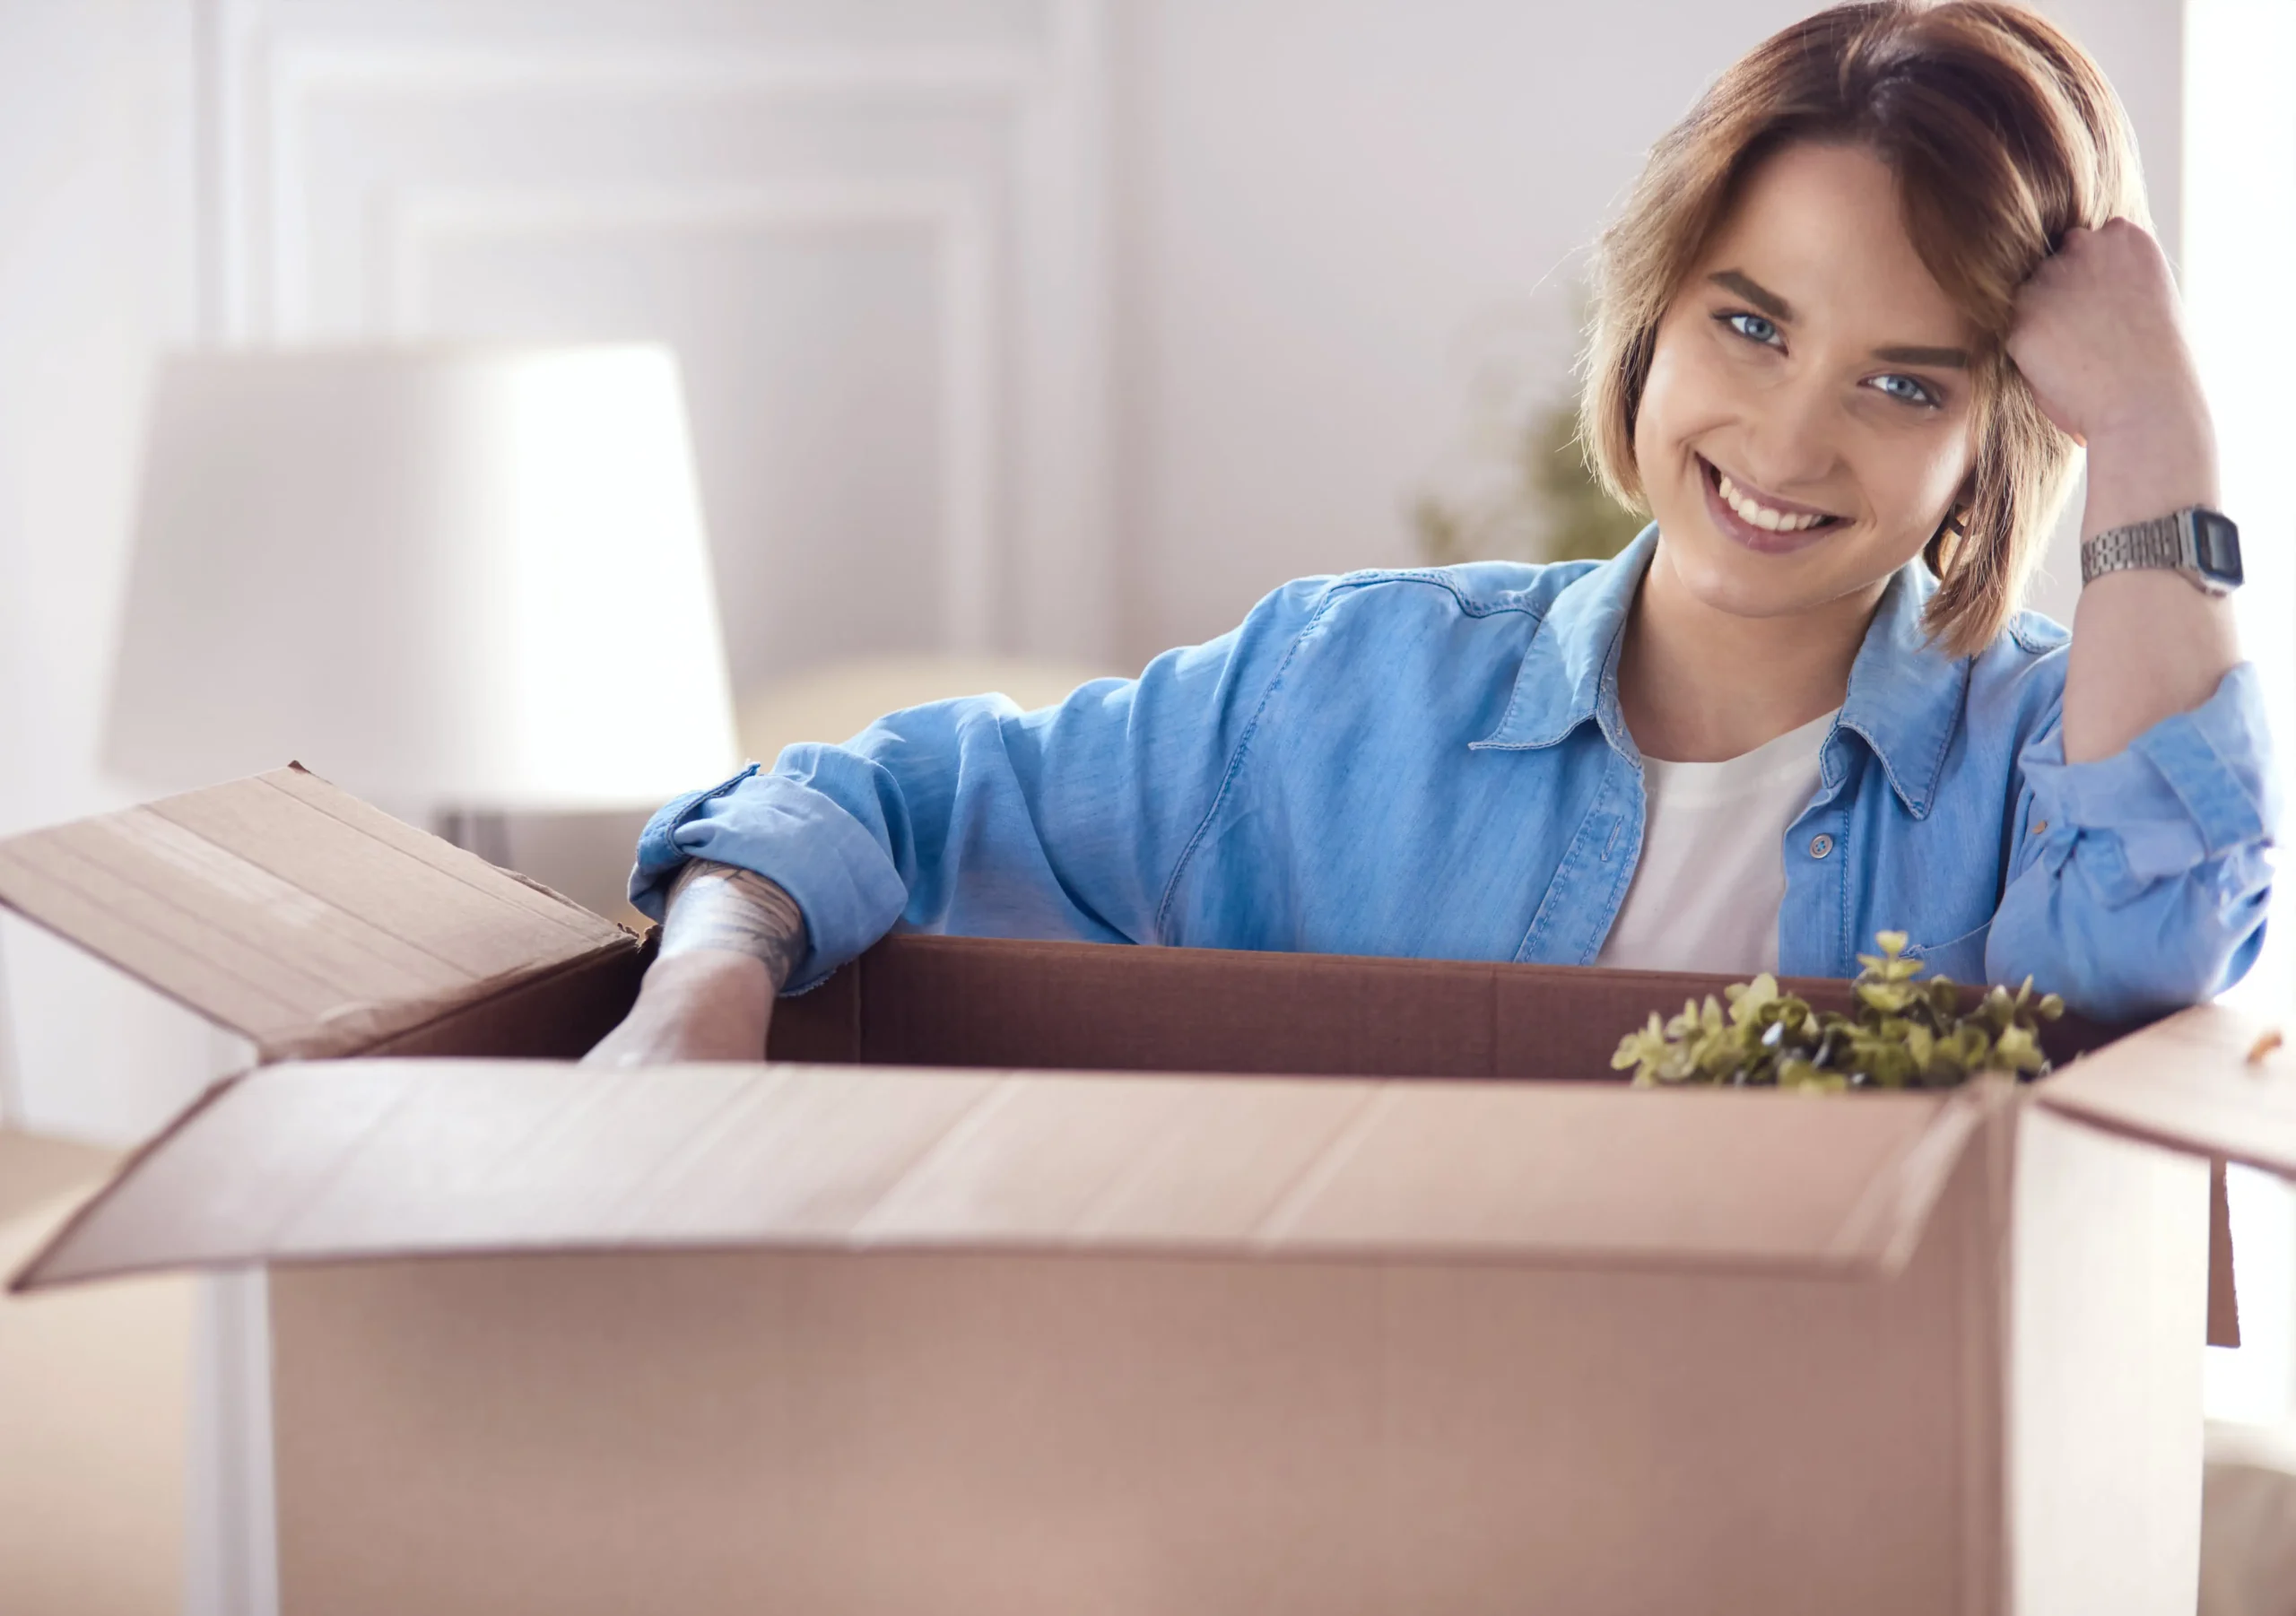 Packing & Unpacking Services for a Seamless Move